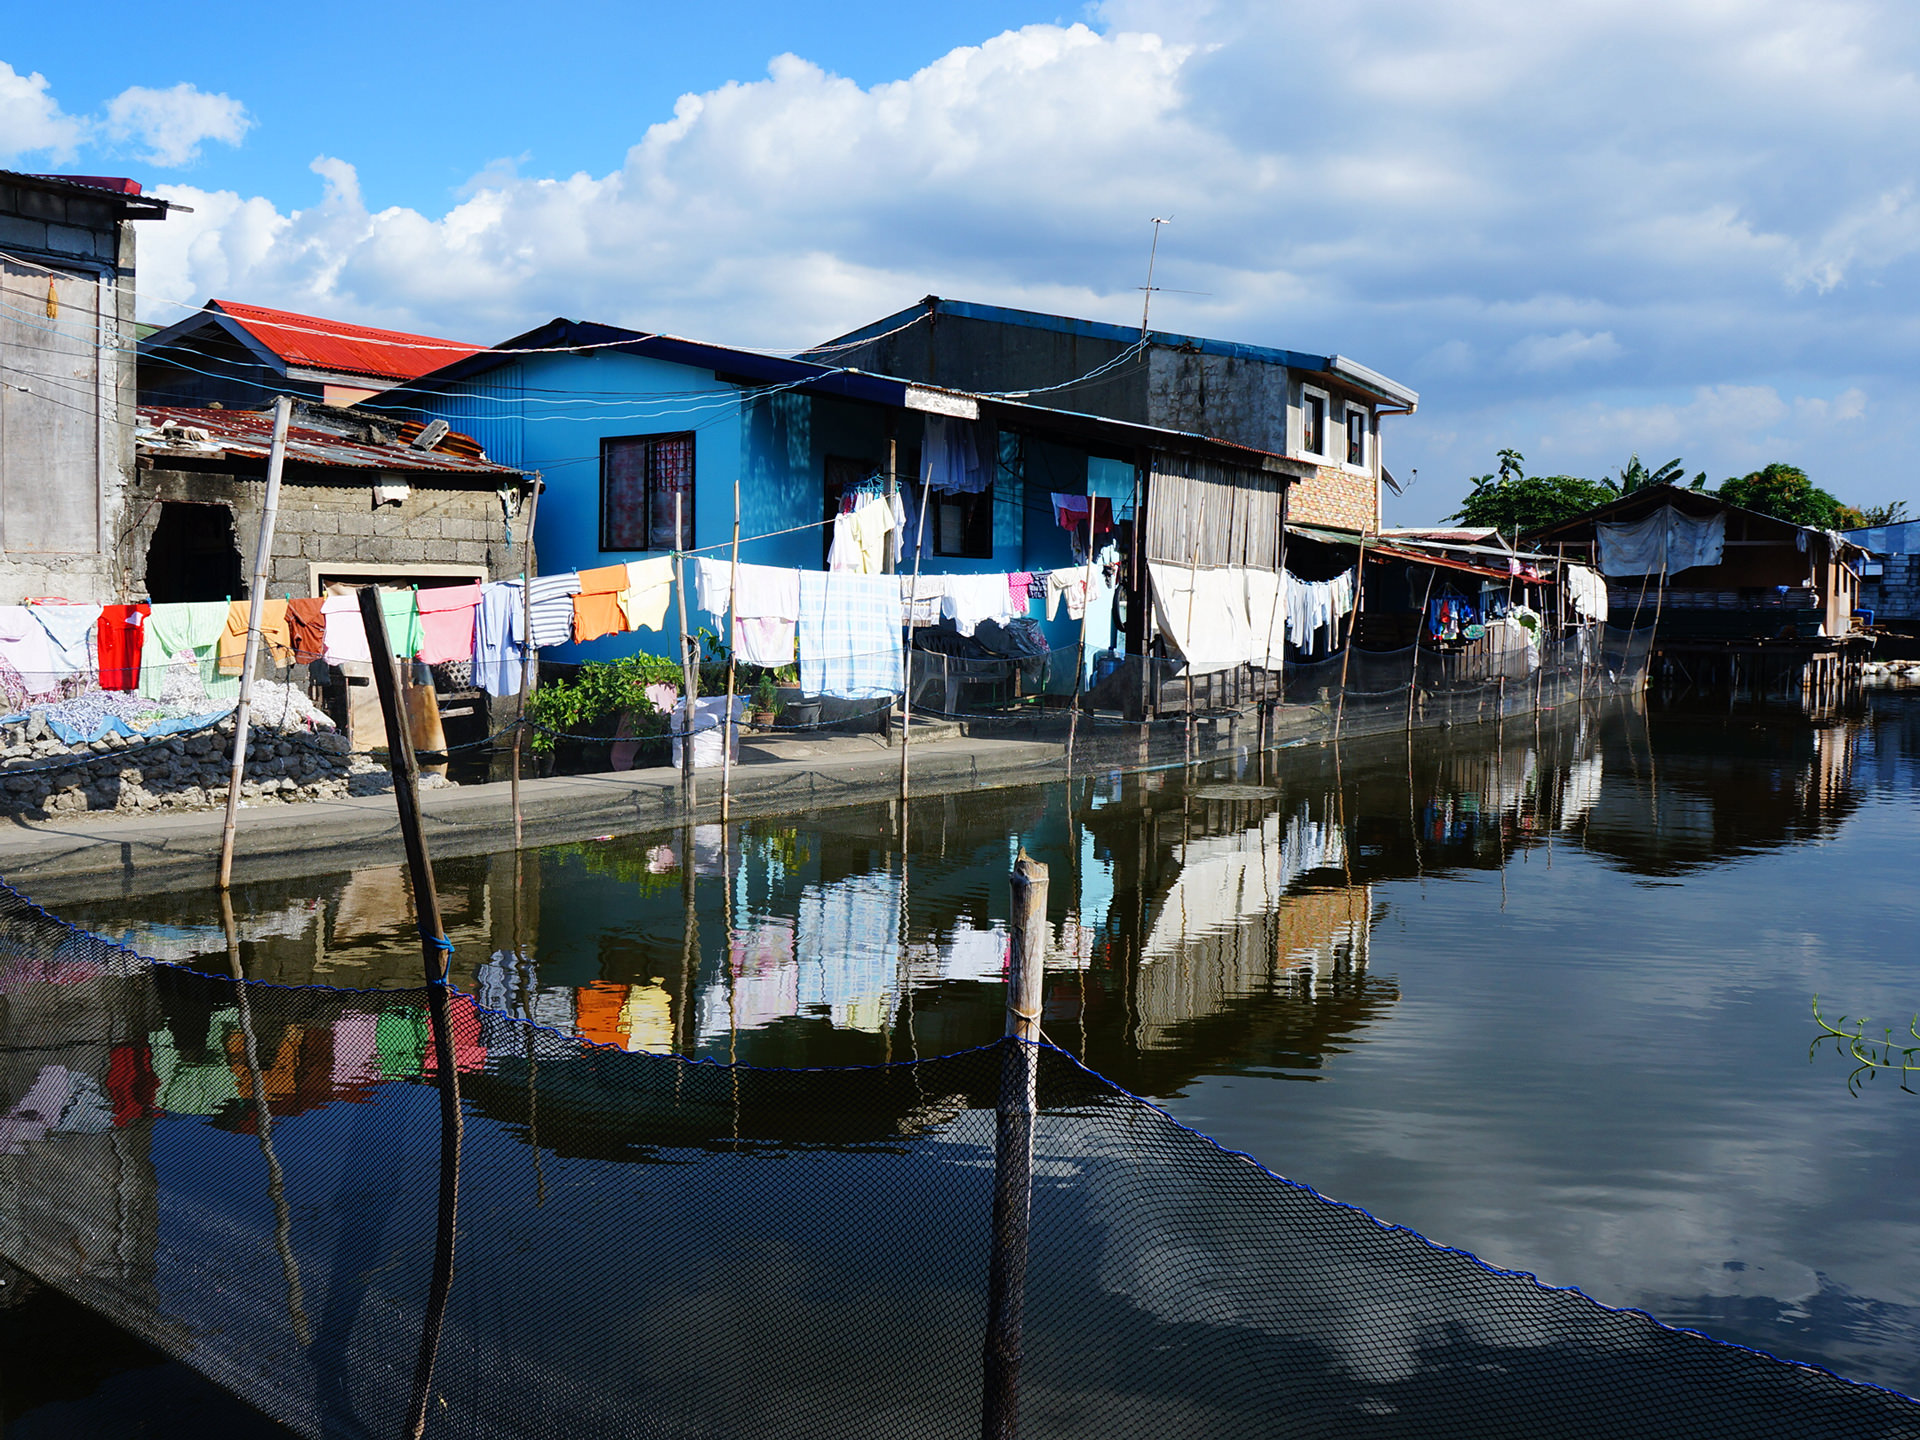 Example of an informal settlement in a flood-prone area